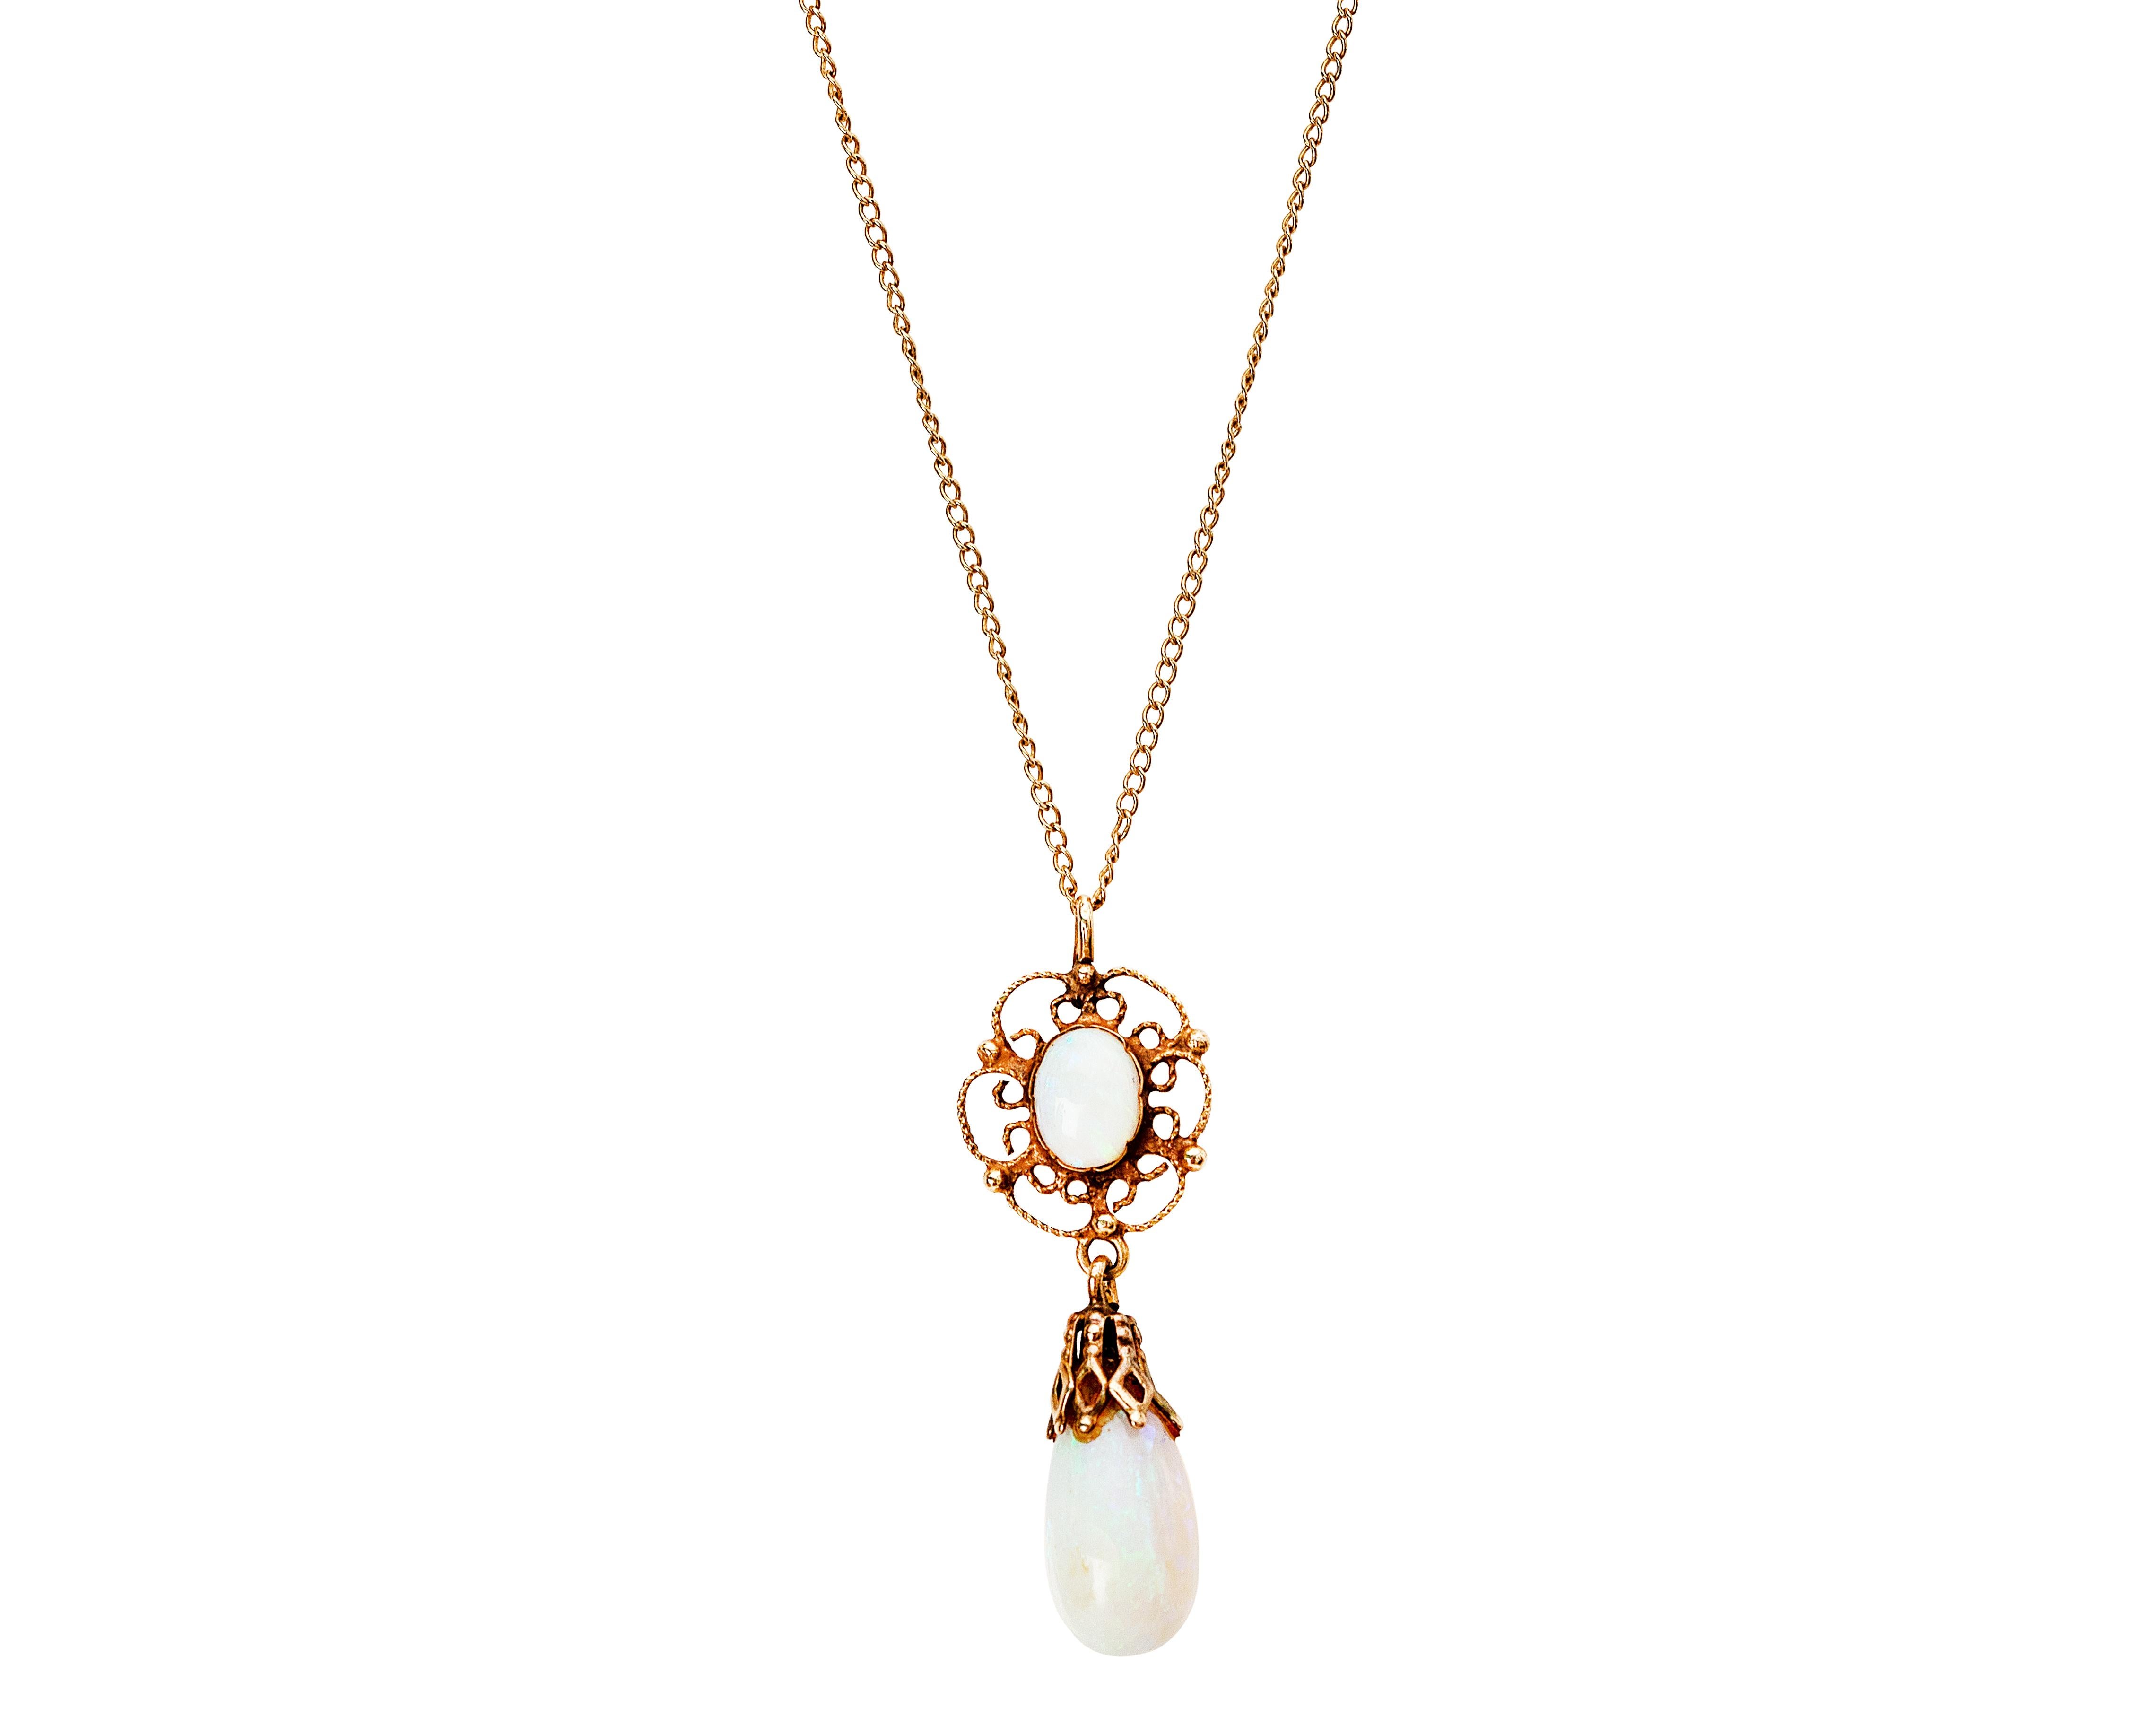 Beautiful 1940s Opal Lavalier Necklace. This stunning necklace features a dull patina 14 karat gold necklace with a gorgeous vintage design pendant. The pendant features 2 opals - one in the center fo the pendant (Smaller of the two), flat embedded